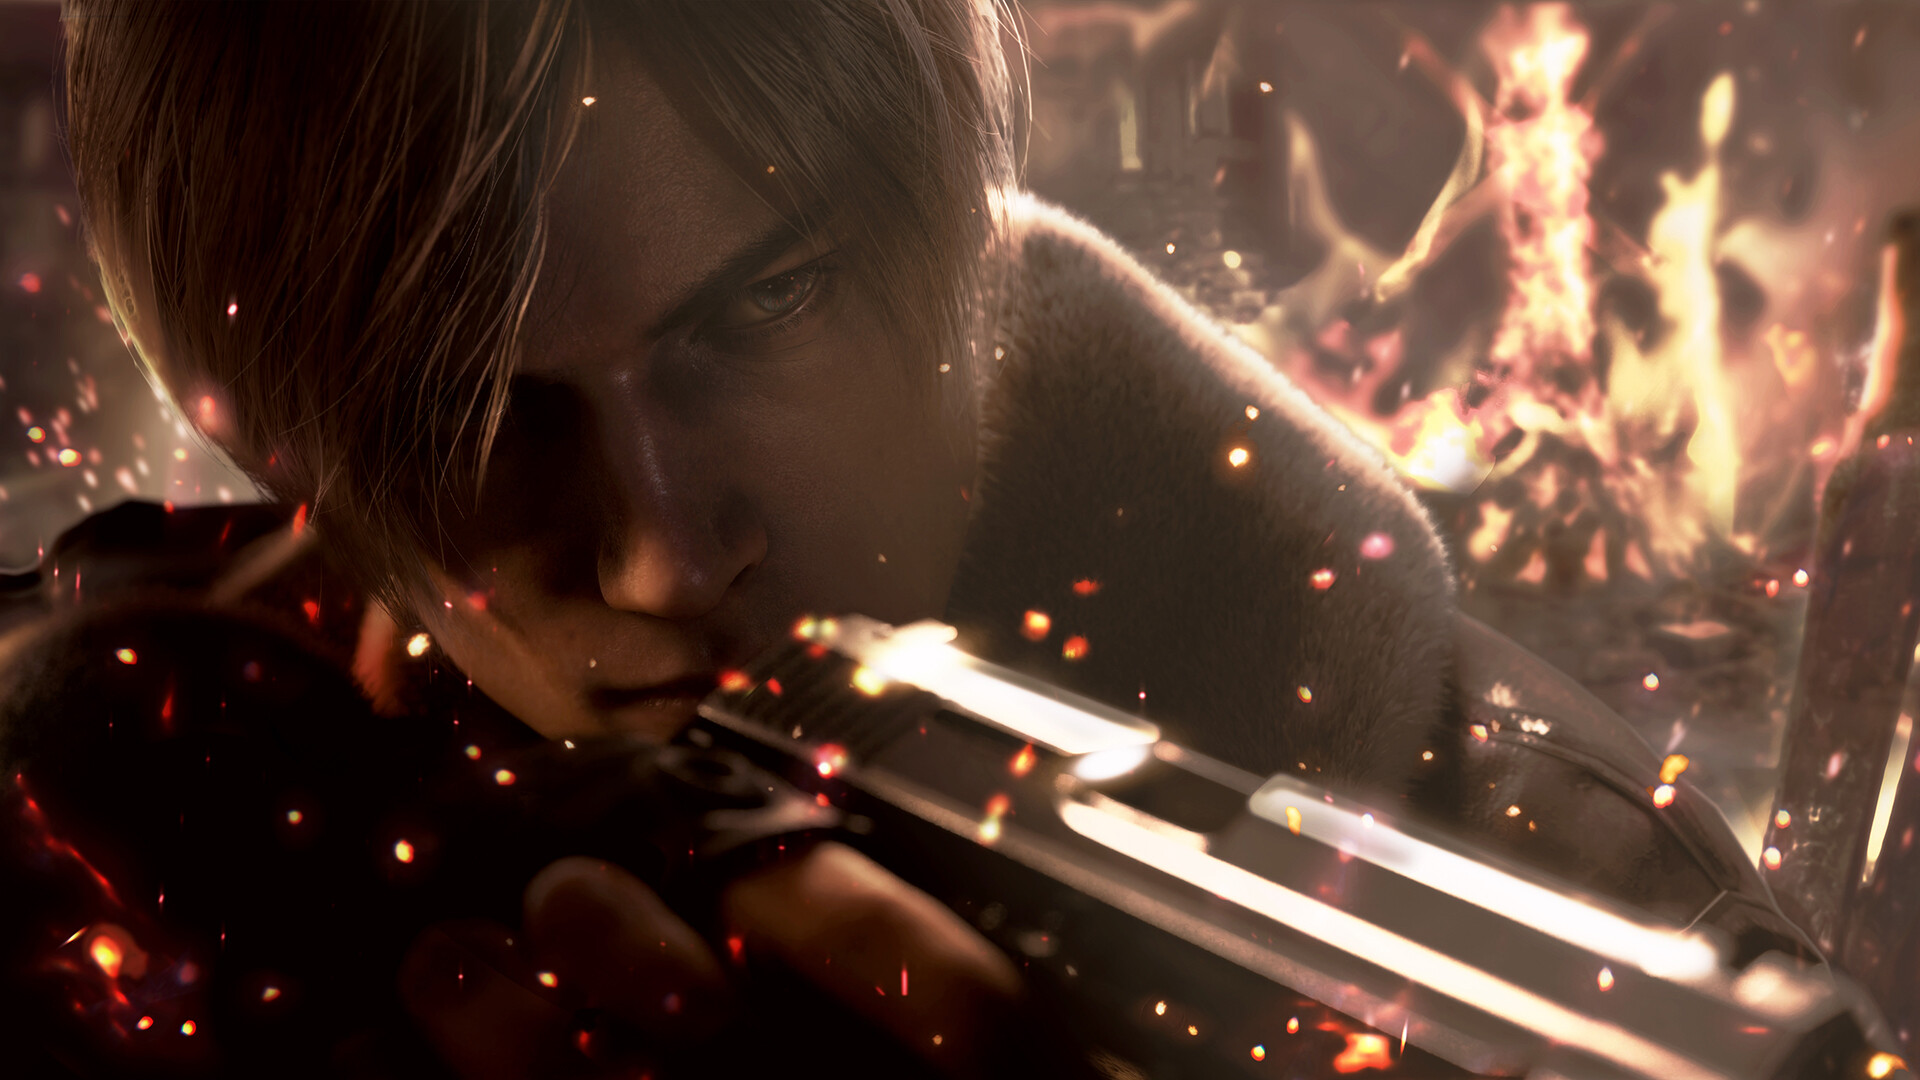 Leon Kennedy aims a pistol while explosions explode behind him in key art for the Resident Evil 4 remake.